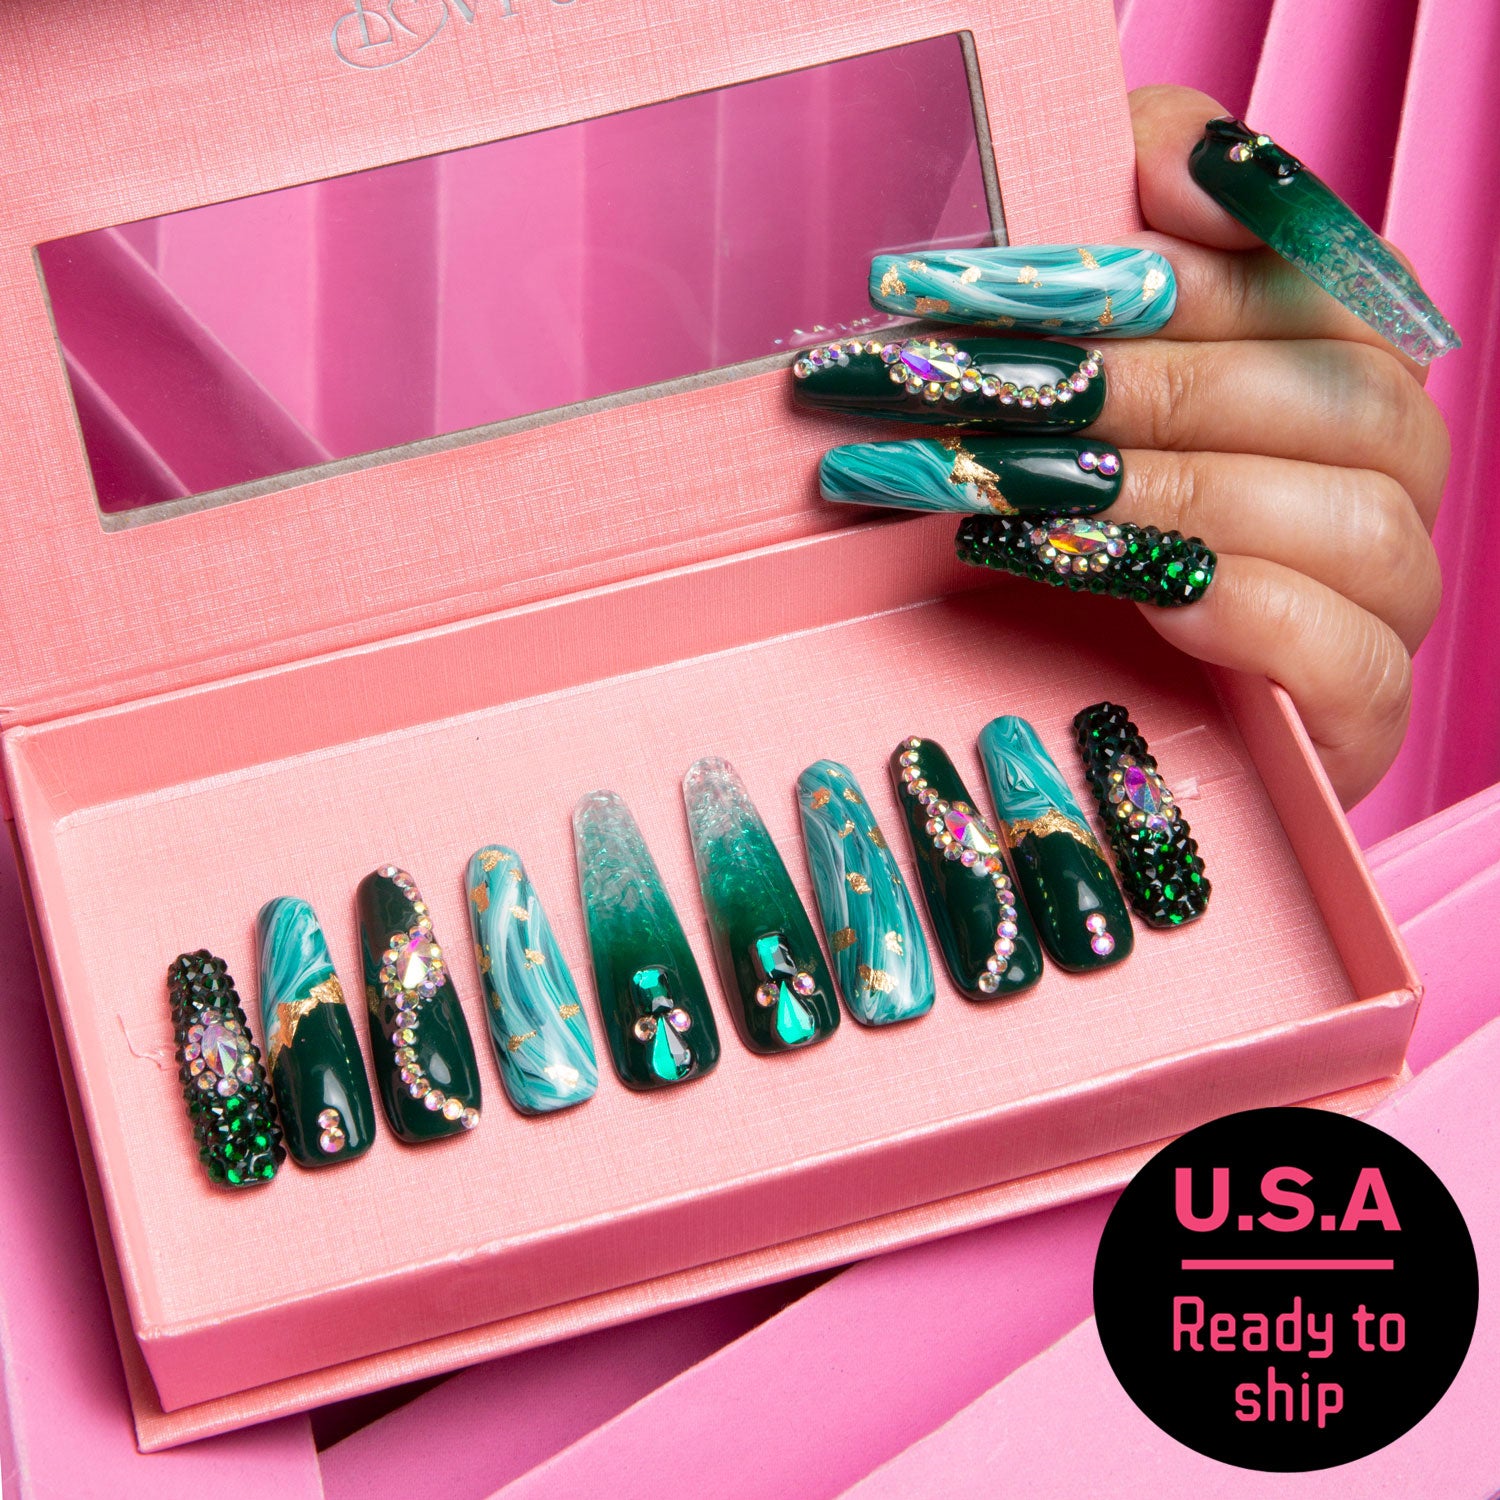 Hand showcasing long, emerald green and gold press-on nails, holding a pink box of Emerald Envy Coffin-shaped nails. Text reads 'U.S.A Ready to ship.'